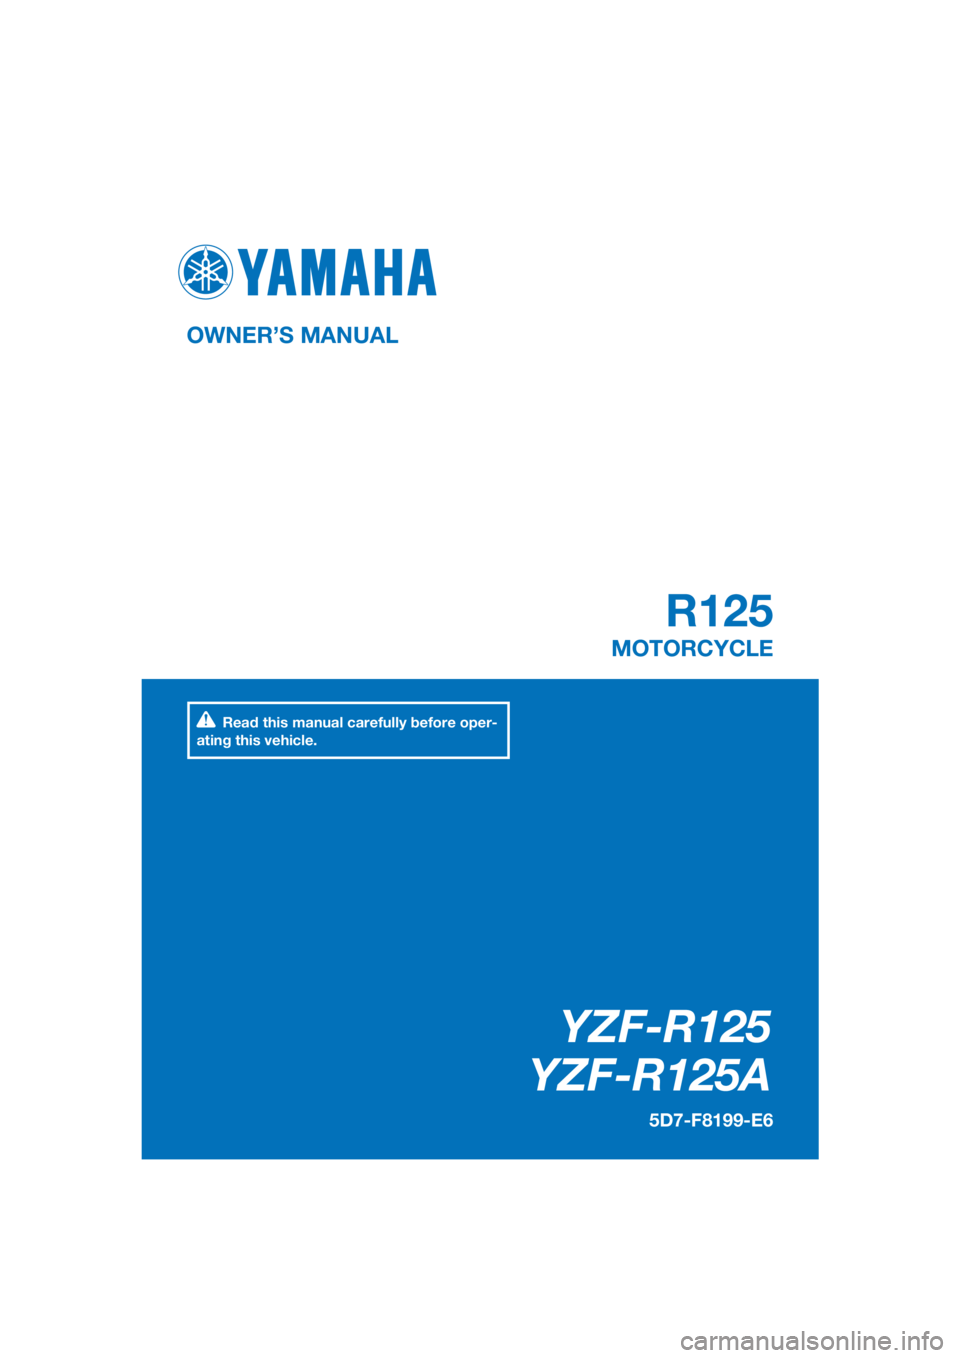 YAMAHA YZF-R125 2016  Owners Manual PANTONE285C
YZF-R125
YZF-R125A
R125
OWNER’S MANUAL
5D7-F8199-E6
MOTORCYCLE
[English  (E)]
Read this manual carefully before oper-
ating this vehicle. 